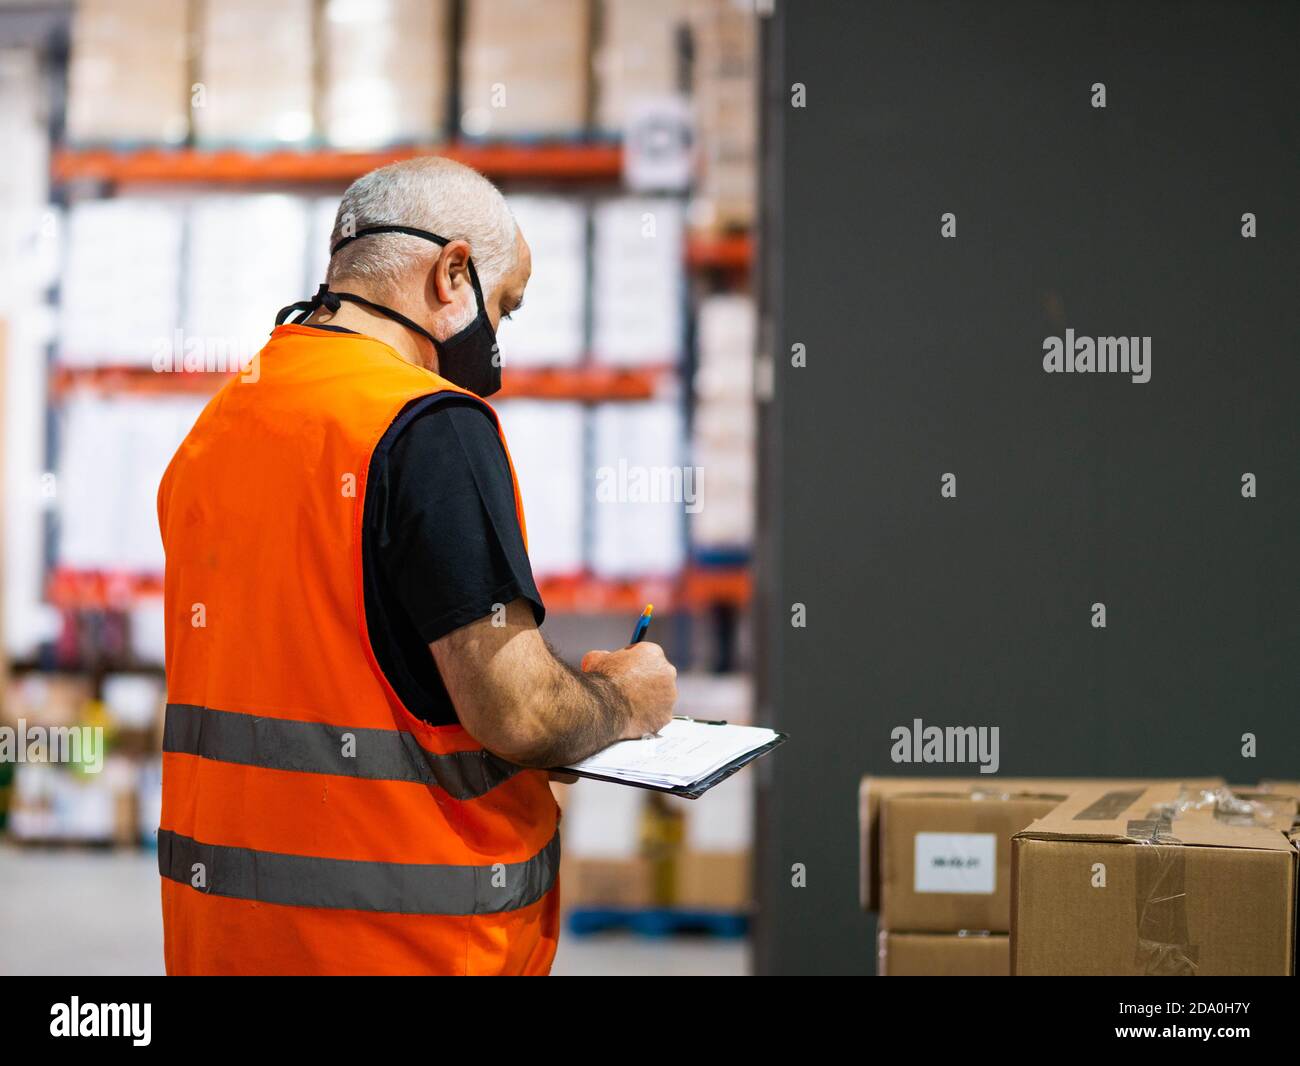 Back view adult worker wearing uniform and protective face mask writing on clipboard while working in spacious storehouse Stock Photo